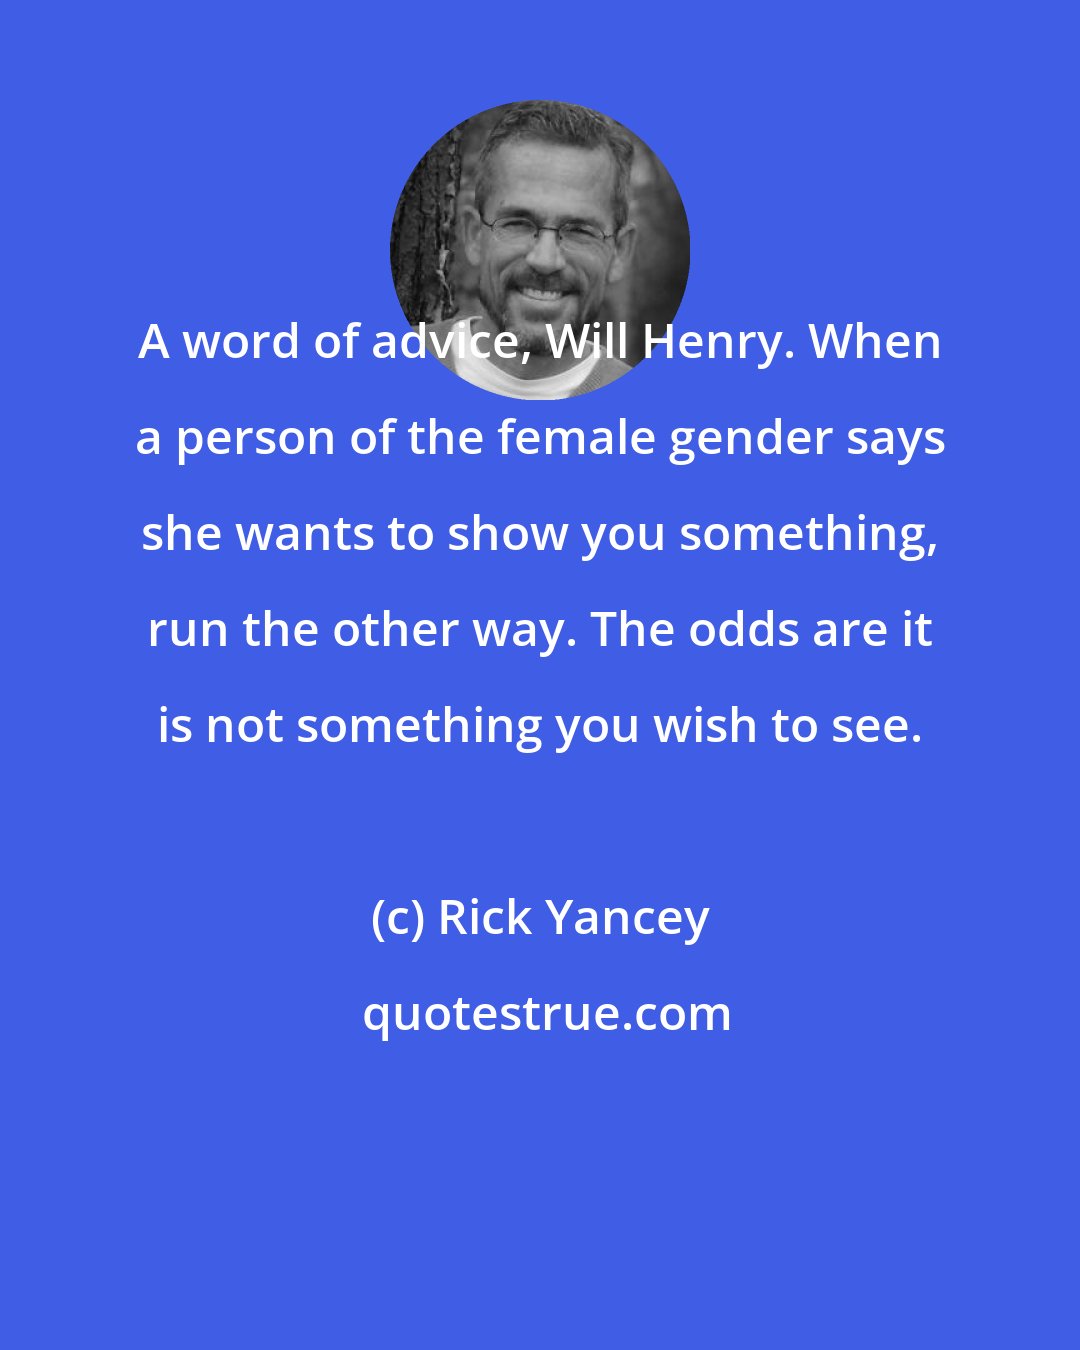 Rick Yancey: A word of advice, Will Henry. When a person of the female gender says she wants to show you something, run the other way. The odds are it is not something you wish to see.